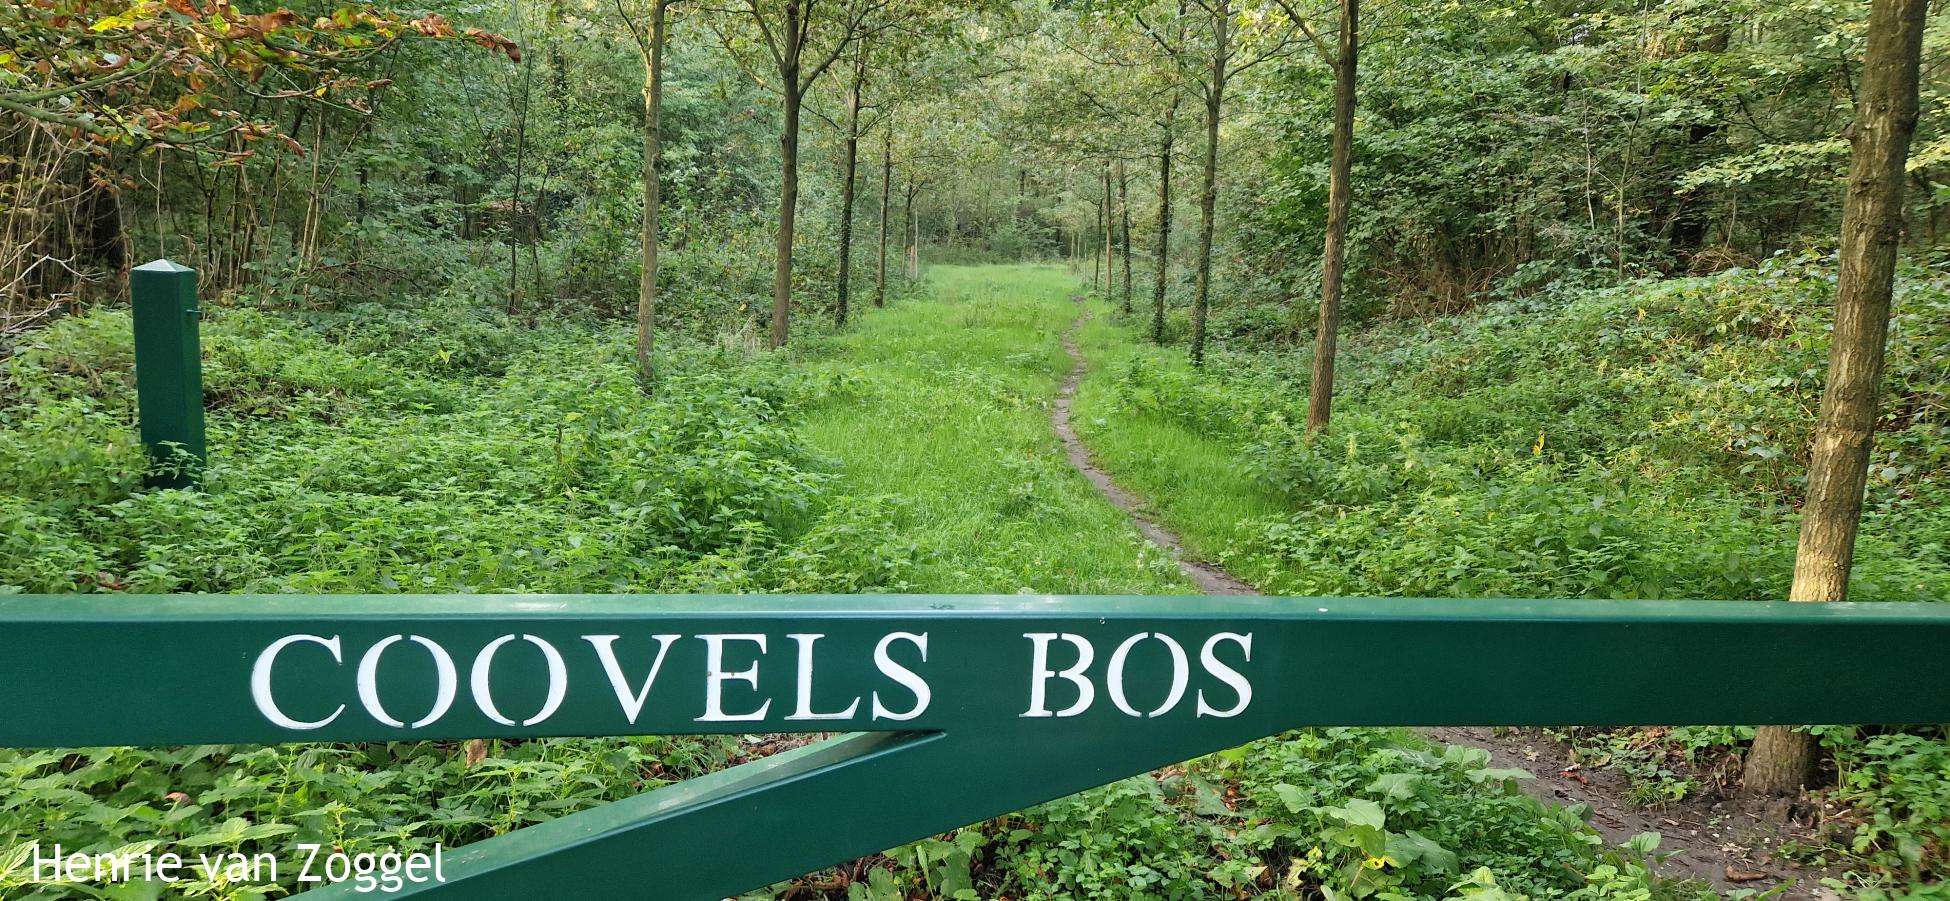 Coovels Bos